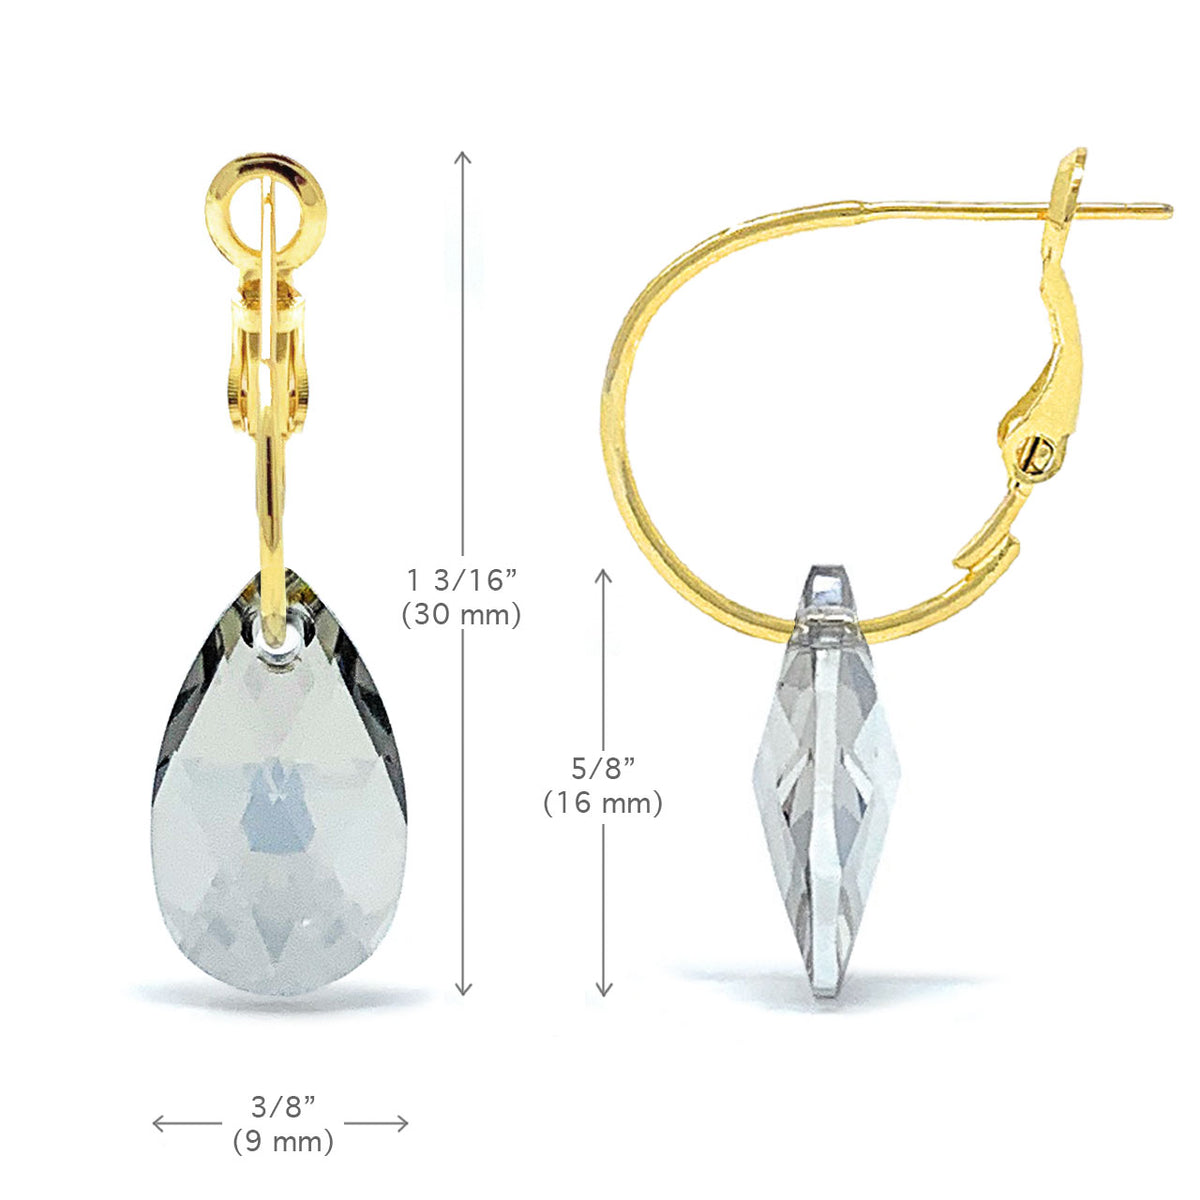 Aurora Small Drop Earrings with Grey Silver Shade Pear Crystals from Swarovski Gold Plated - Ed Heart